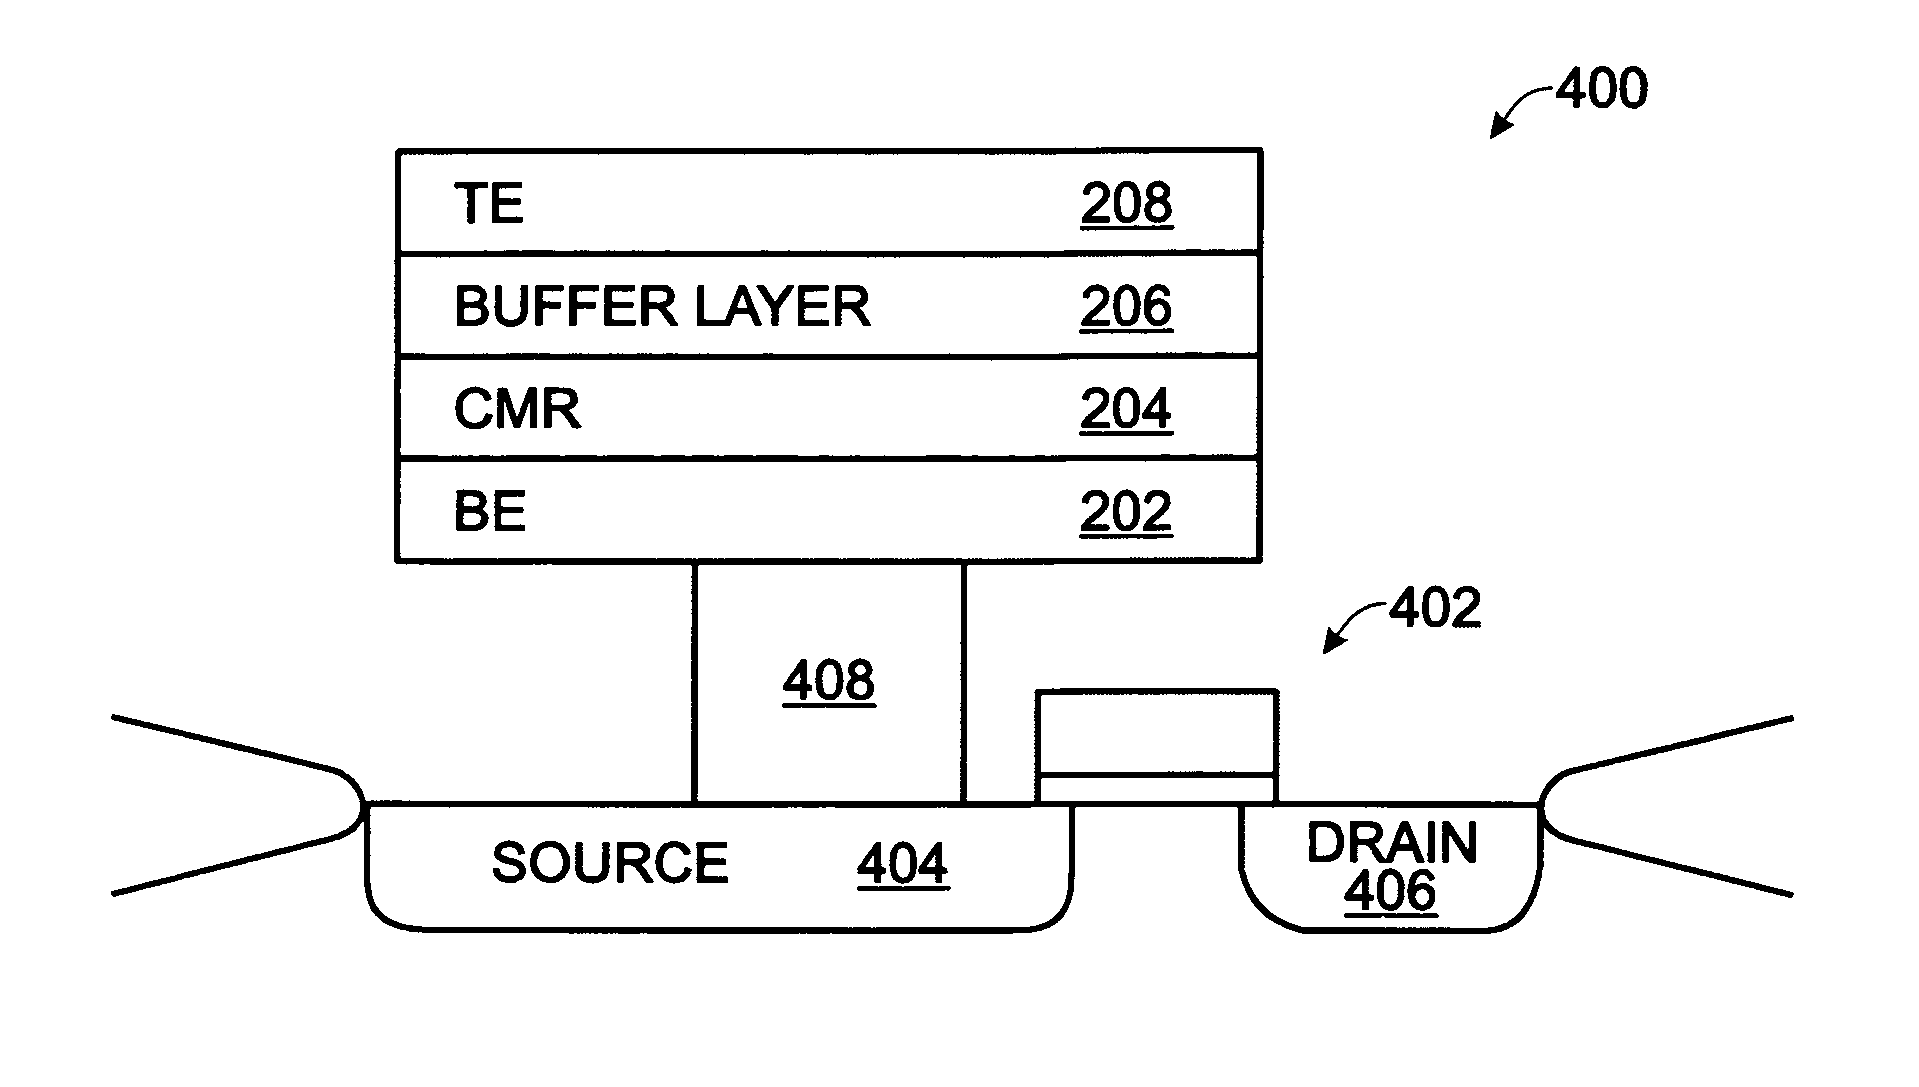 Buffered-layer memory cell